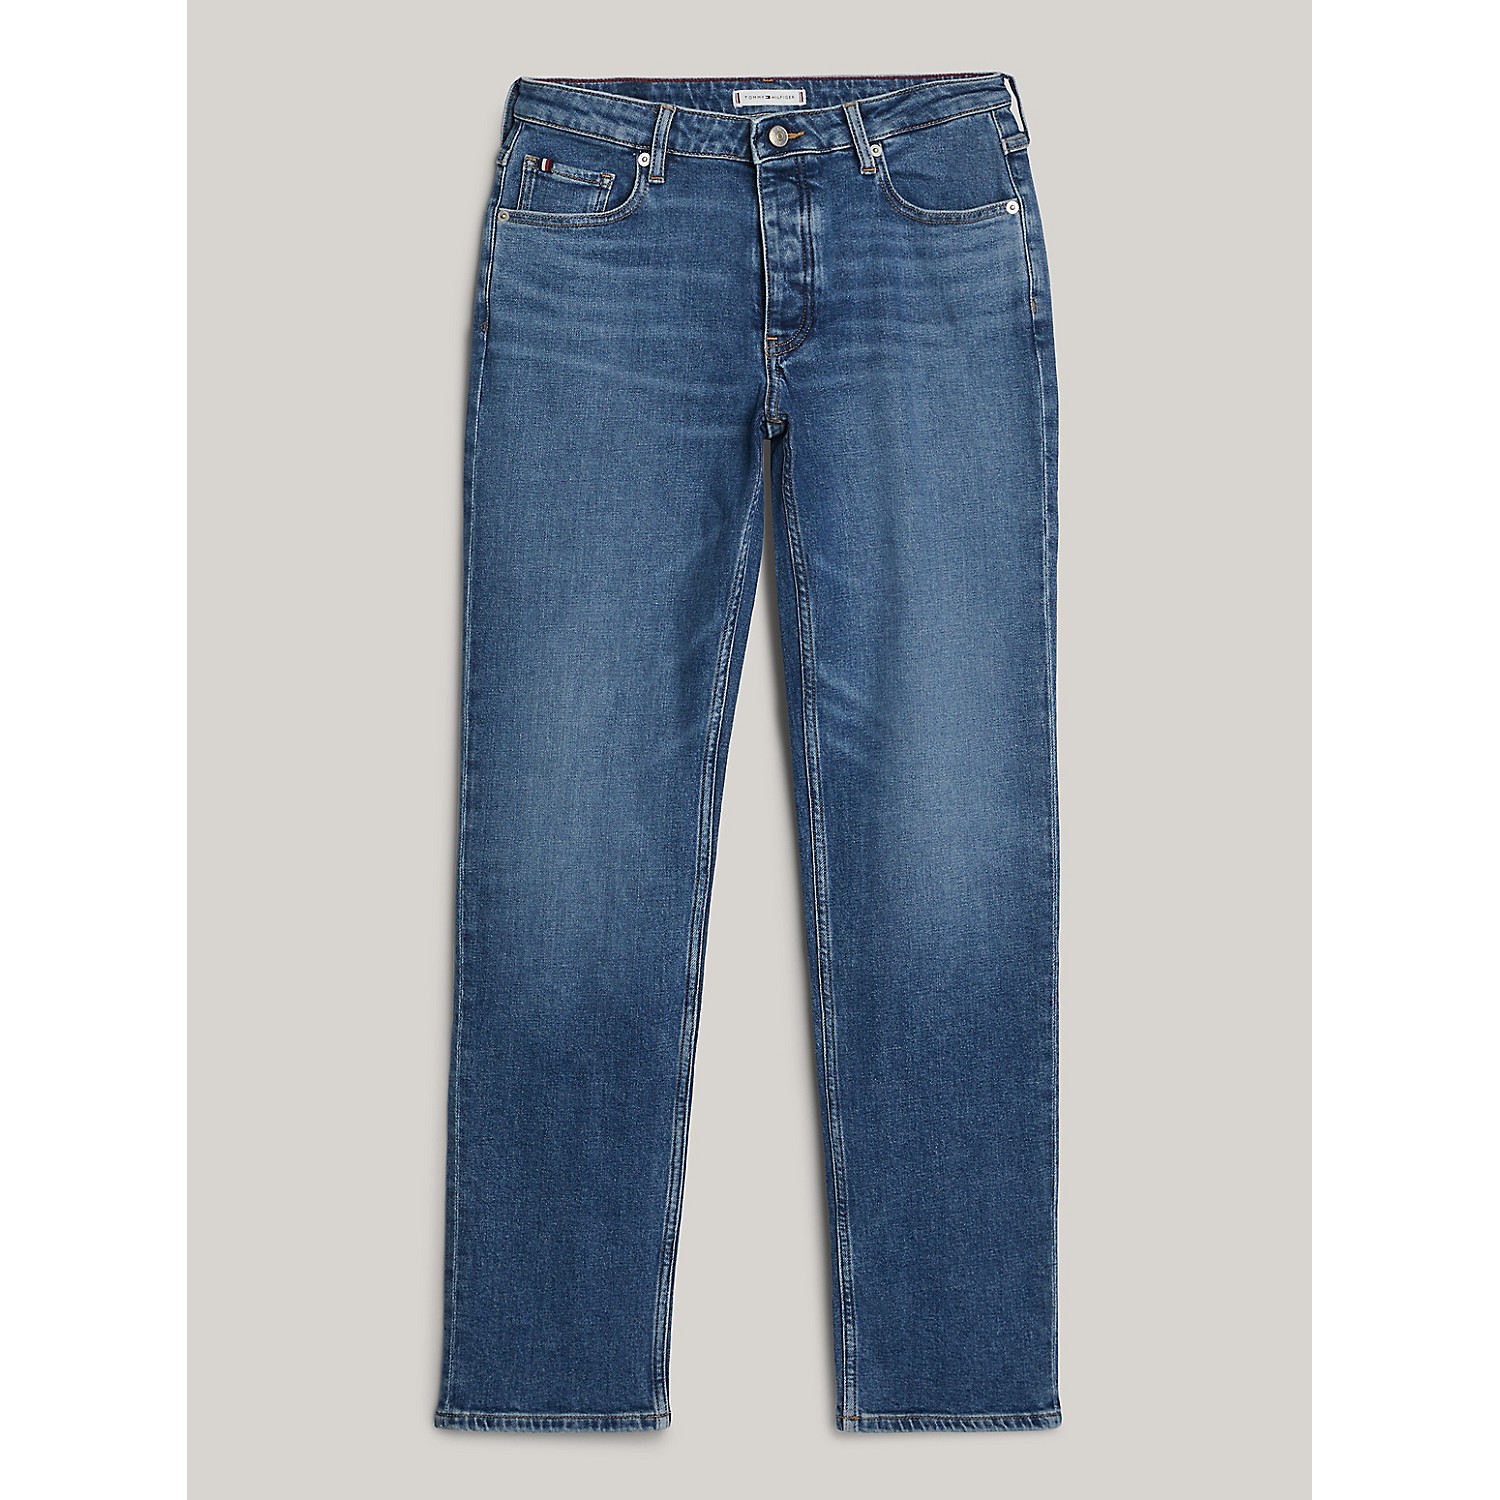 TOMMY HILFIGER Mid-Rise Straight Fit Light Wash Jean